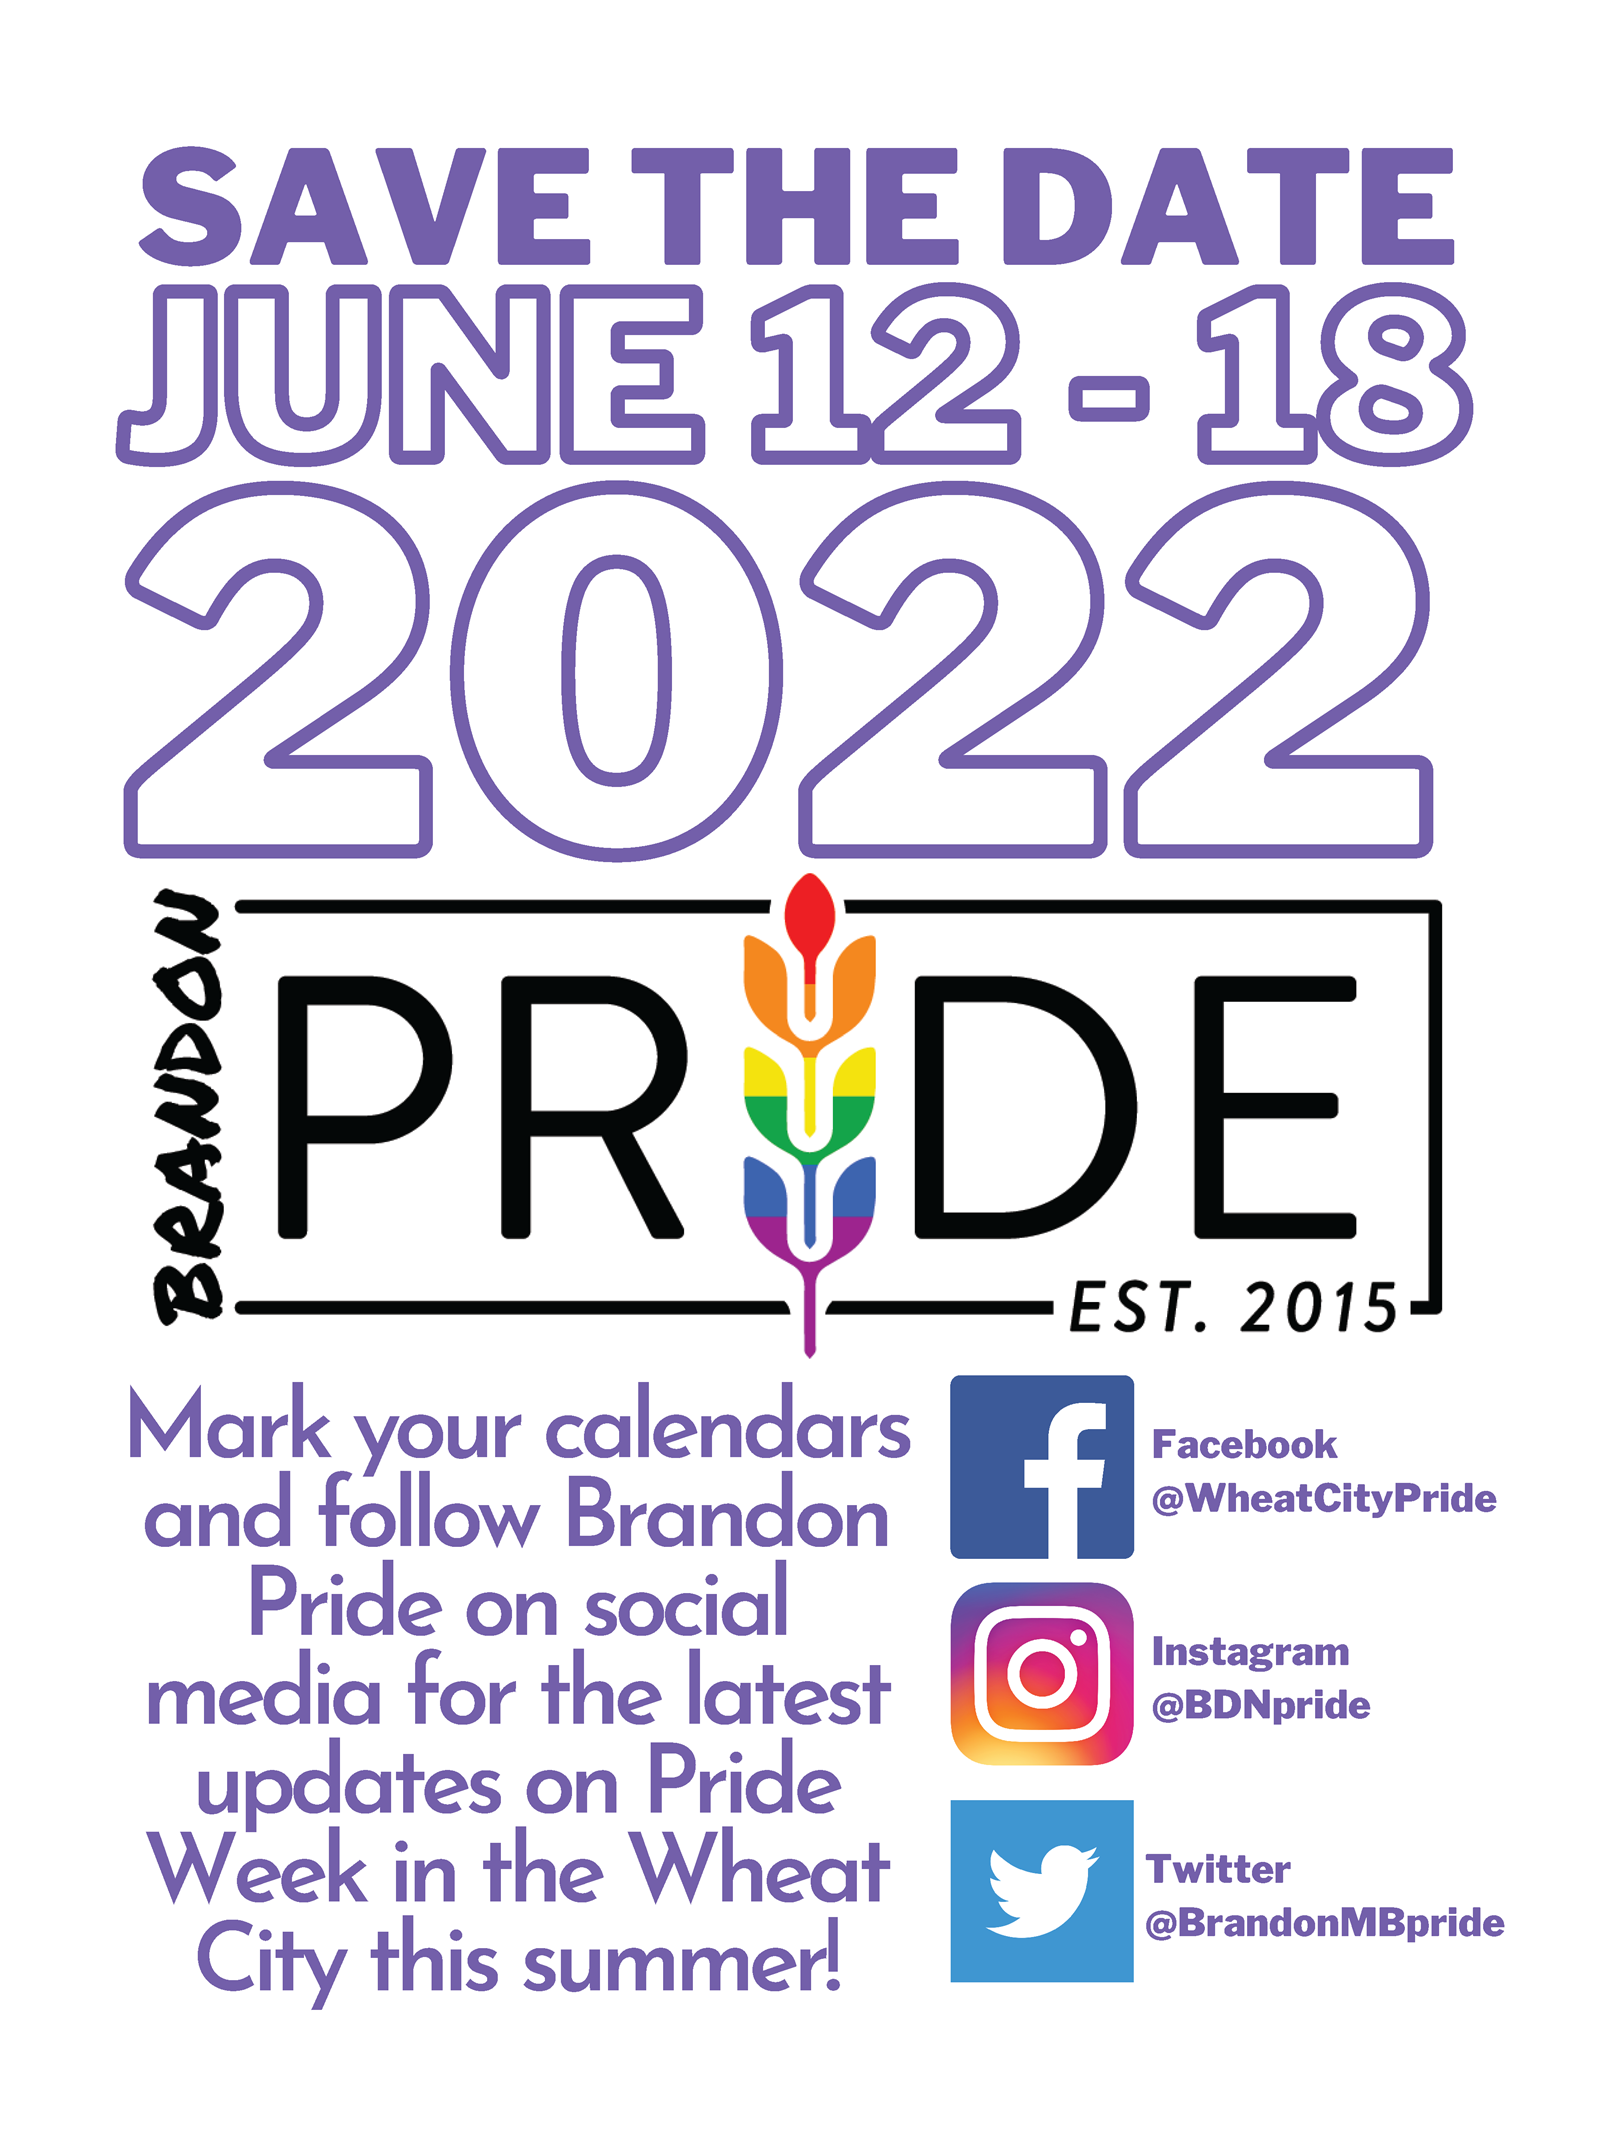 2022-04-04%20BDN%20Pride%202022%20Save%20the%20Date.png